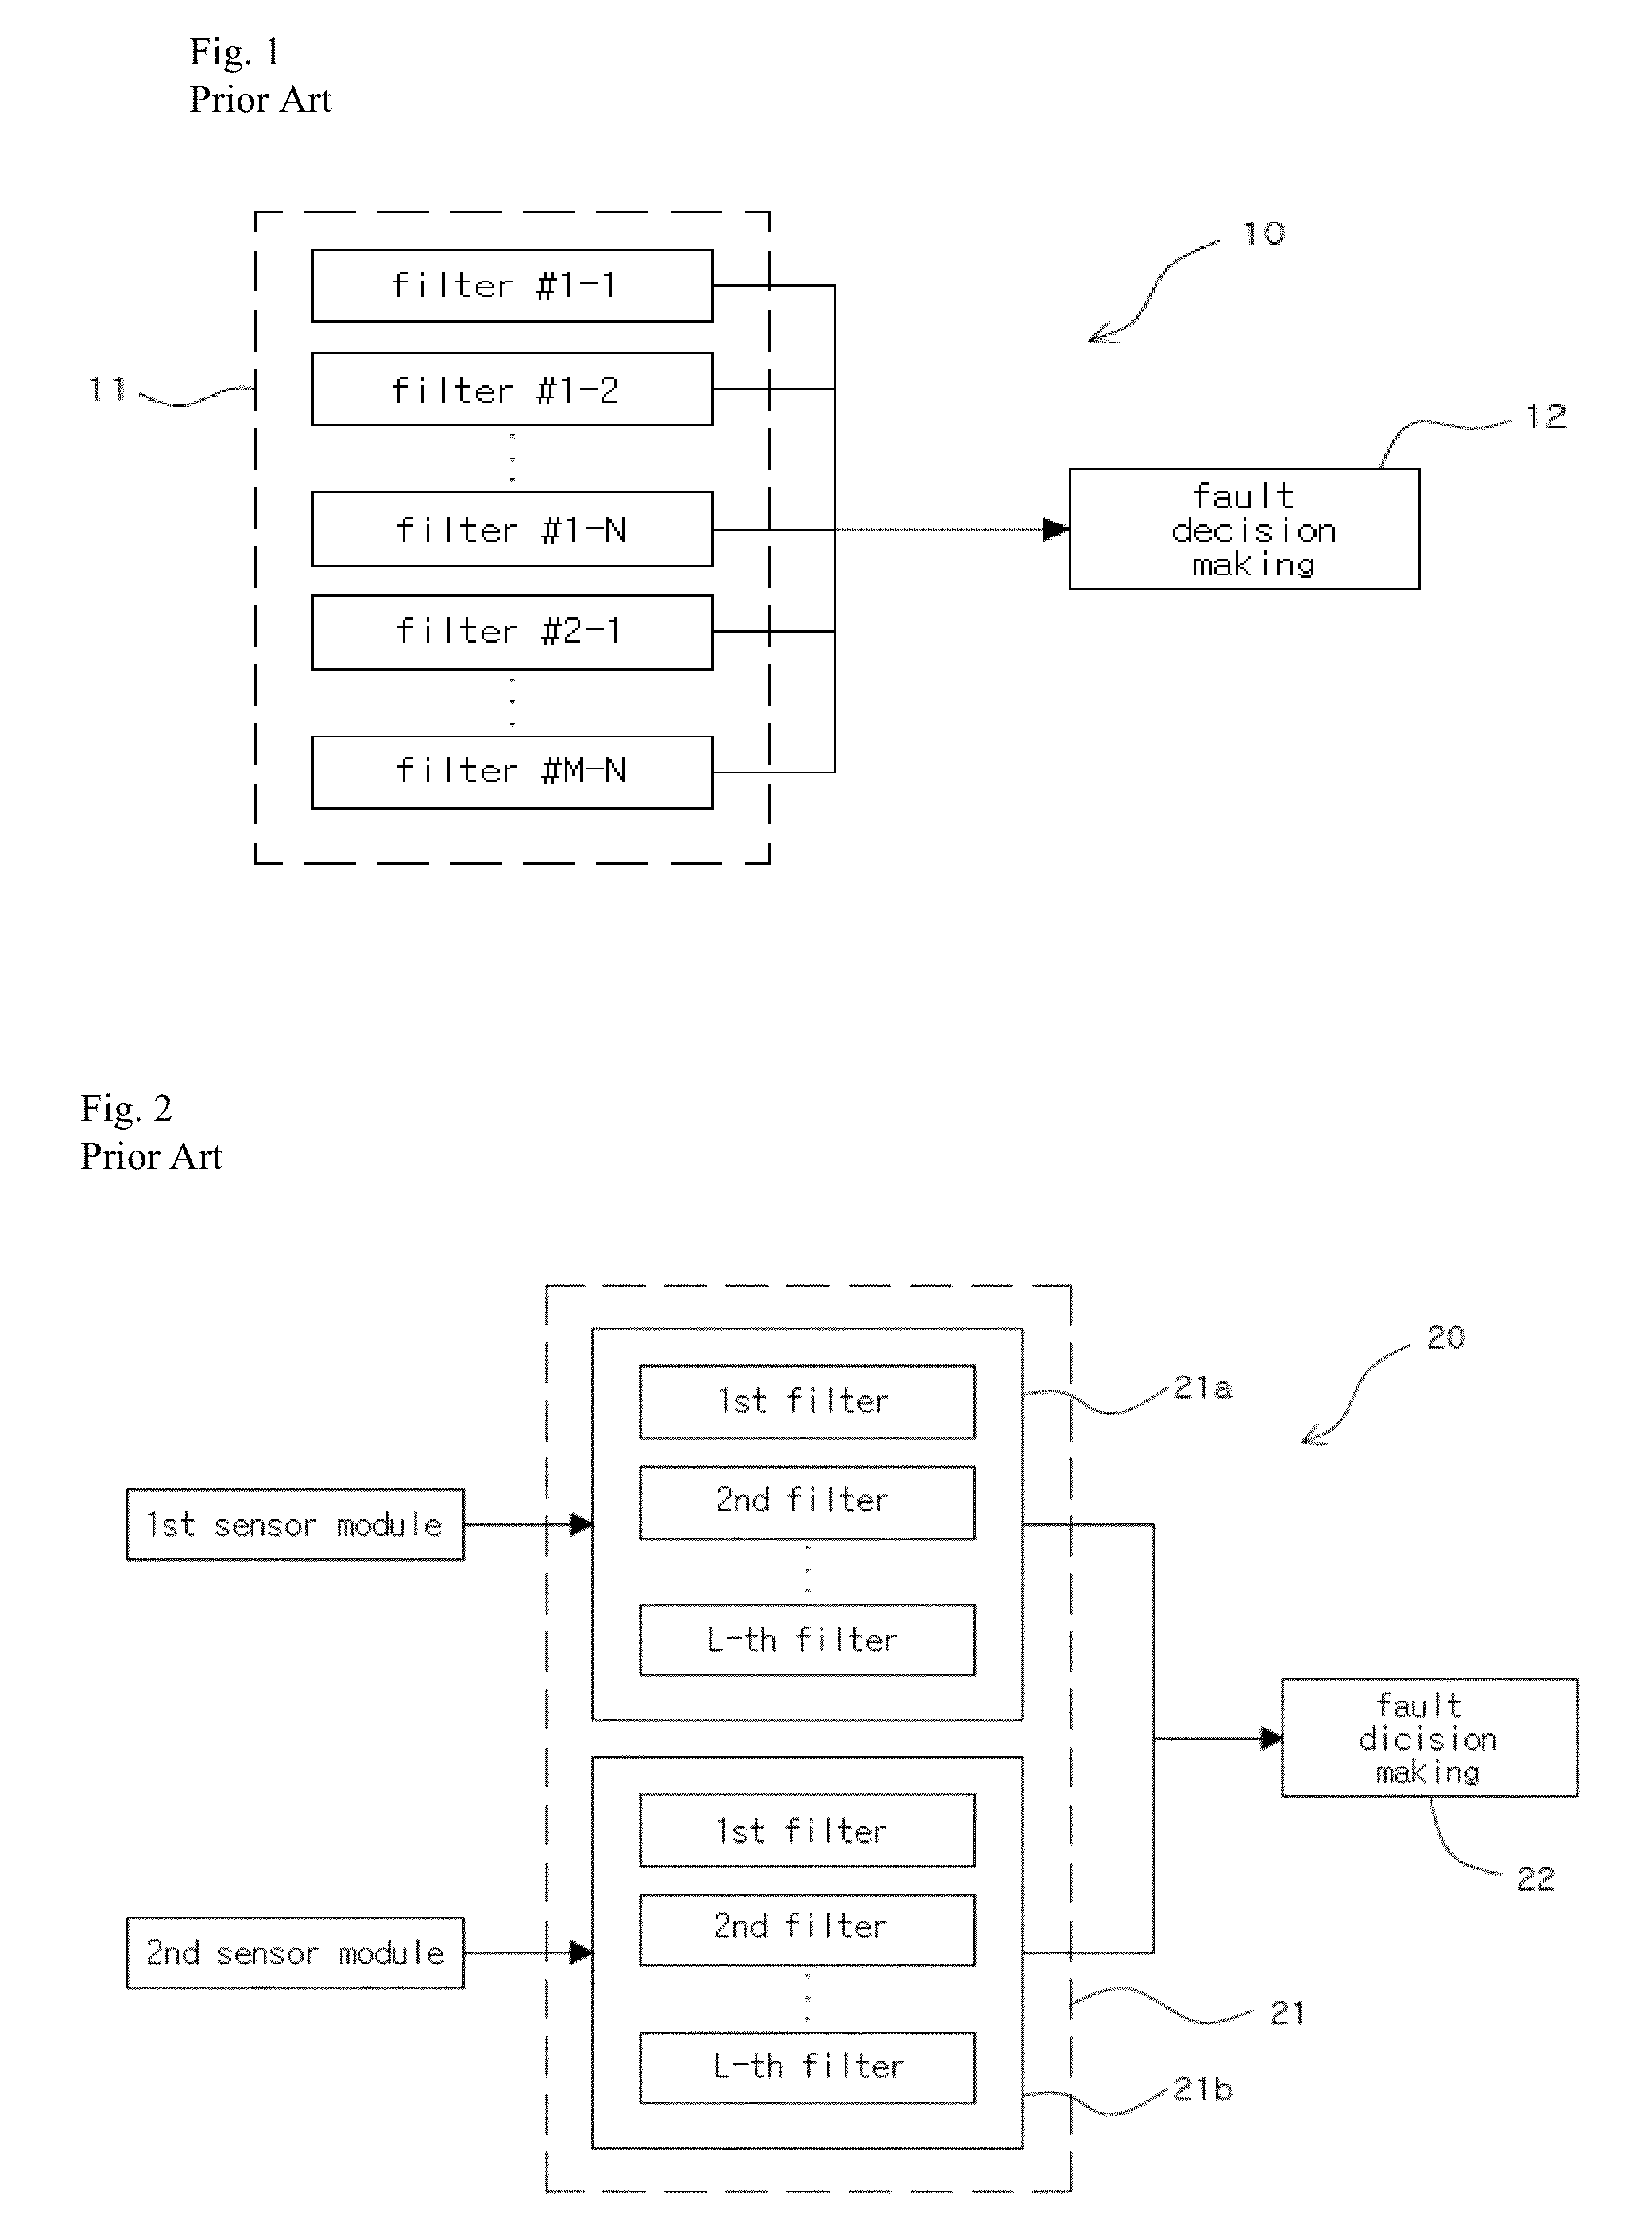 Fault detector and fault detection method for attitude control system of spacecraft